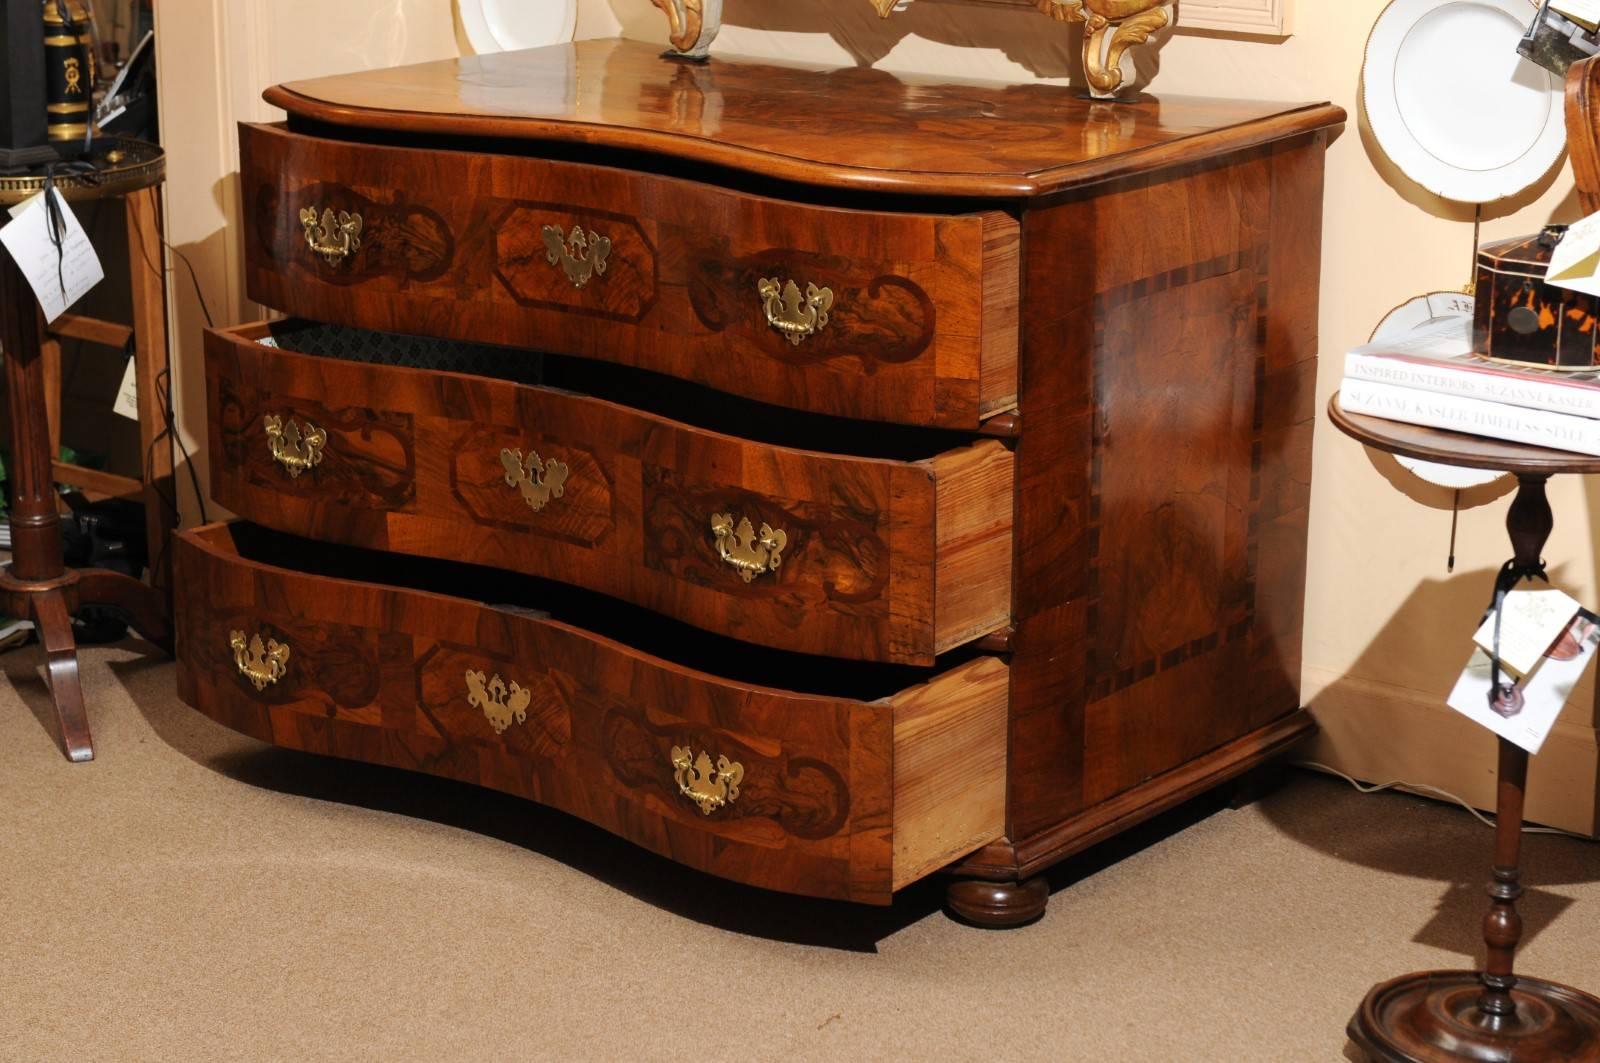 19th Century German Walnut Commode with Parquetry Inlay and Bun Feet 1